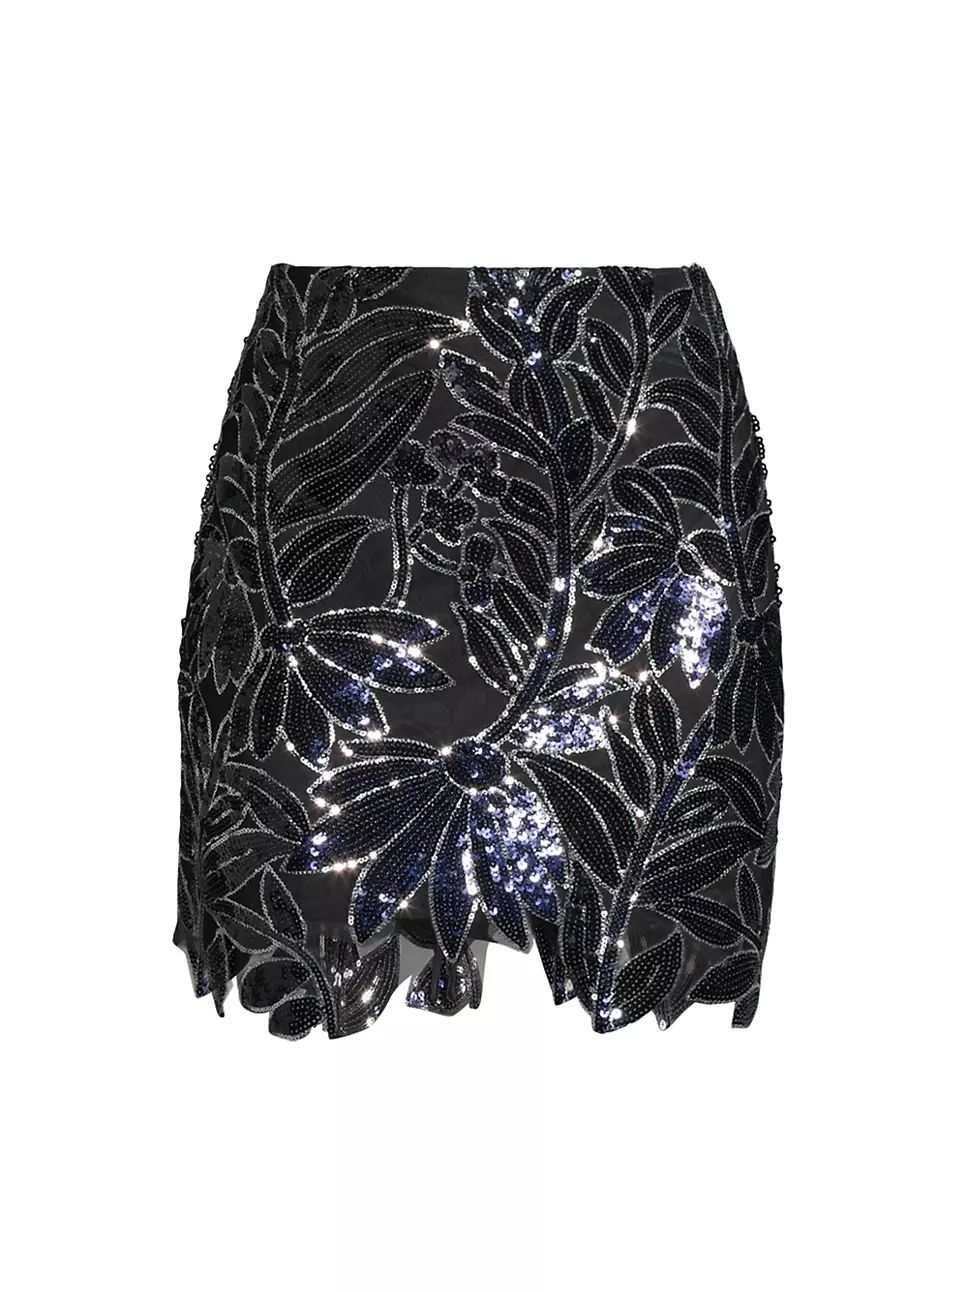 Milly Kristina Floral Sequined Miniskirt | Saks Fifth Avenue